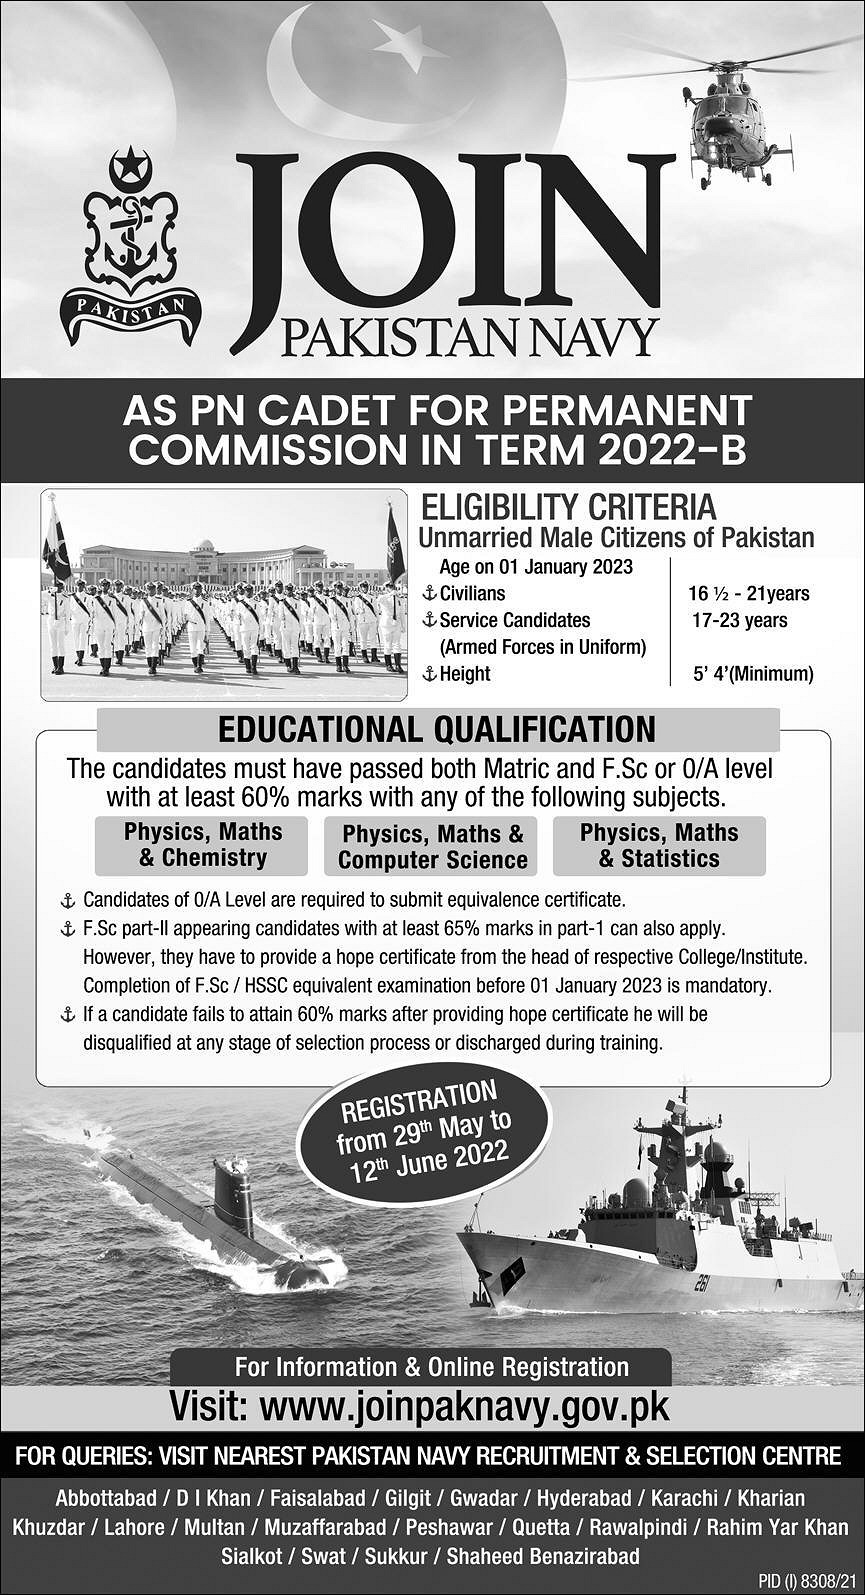 Join Pakistan Navy As PN Cadet For Permanent Commission in Terms 2022-B